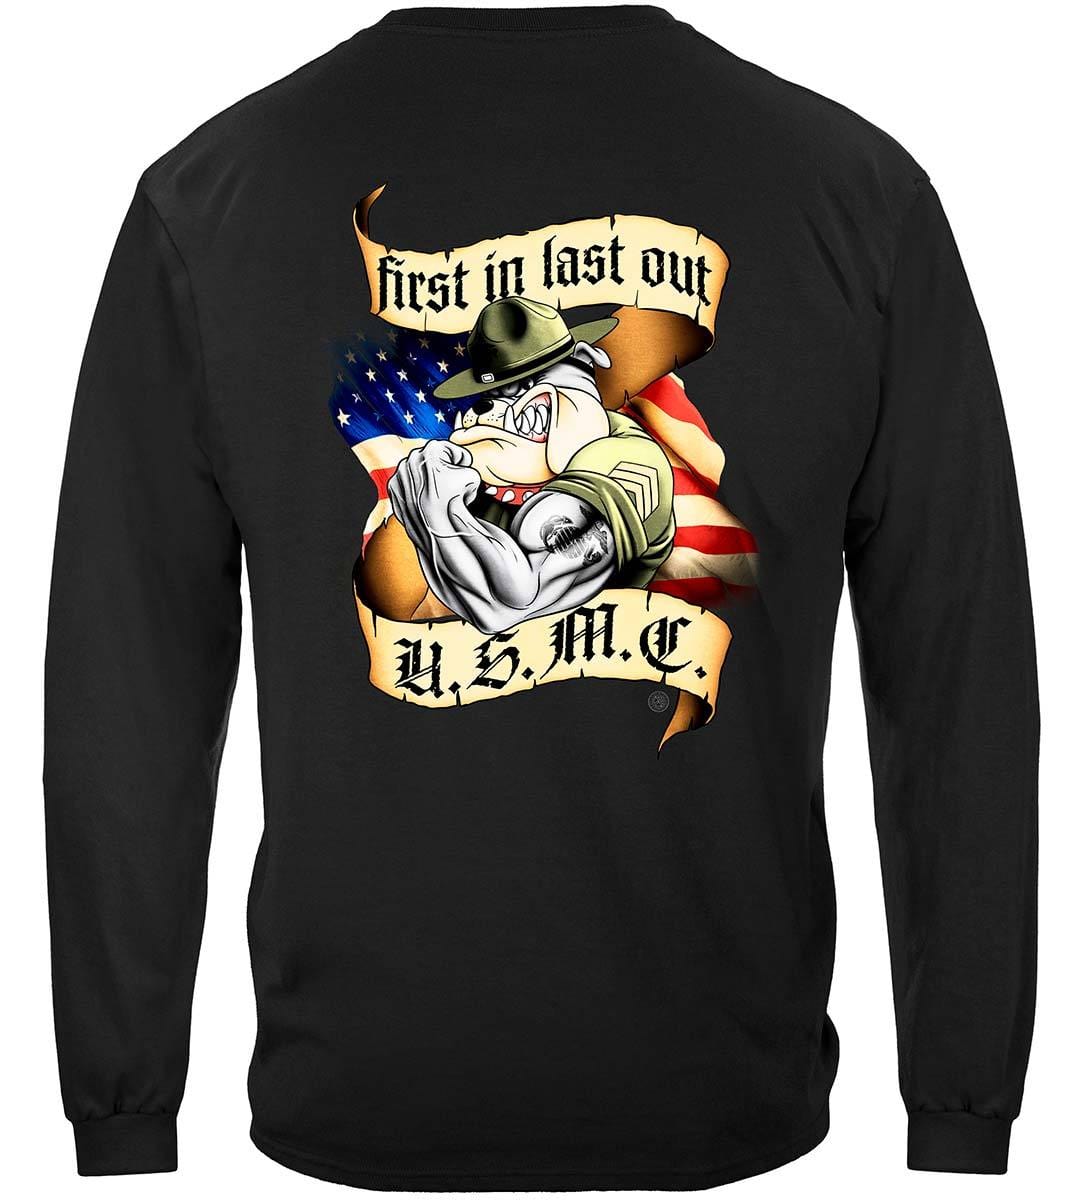 First In Last Out Marine Corps Premium T-Shirt